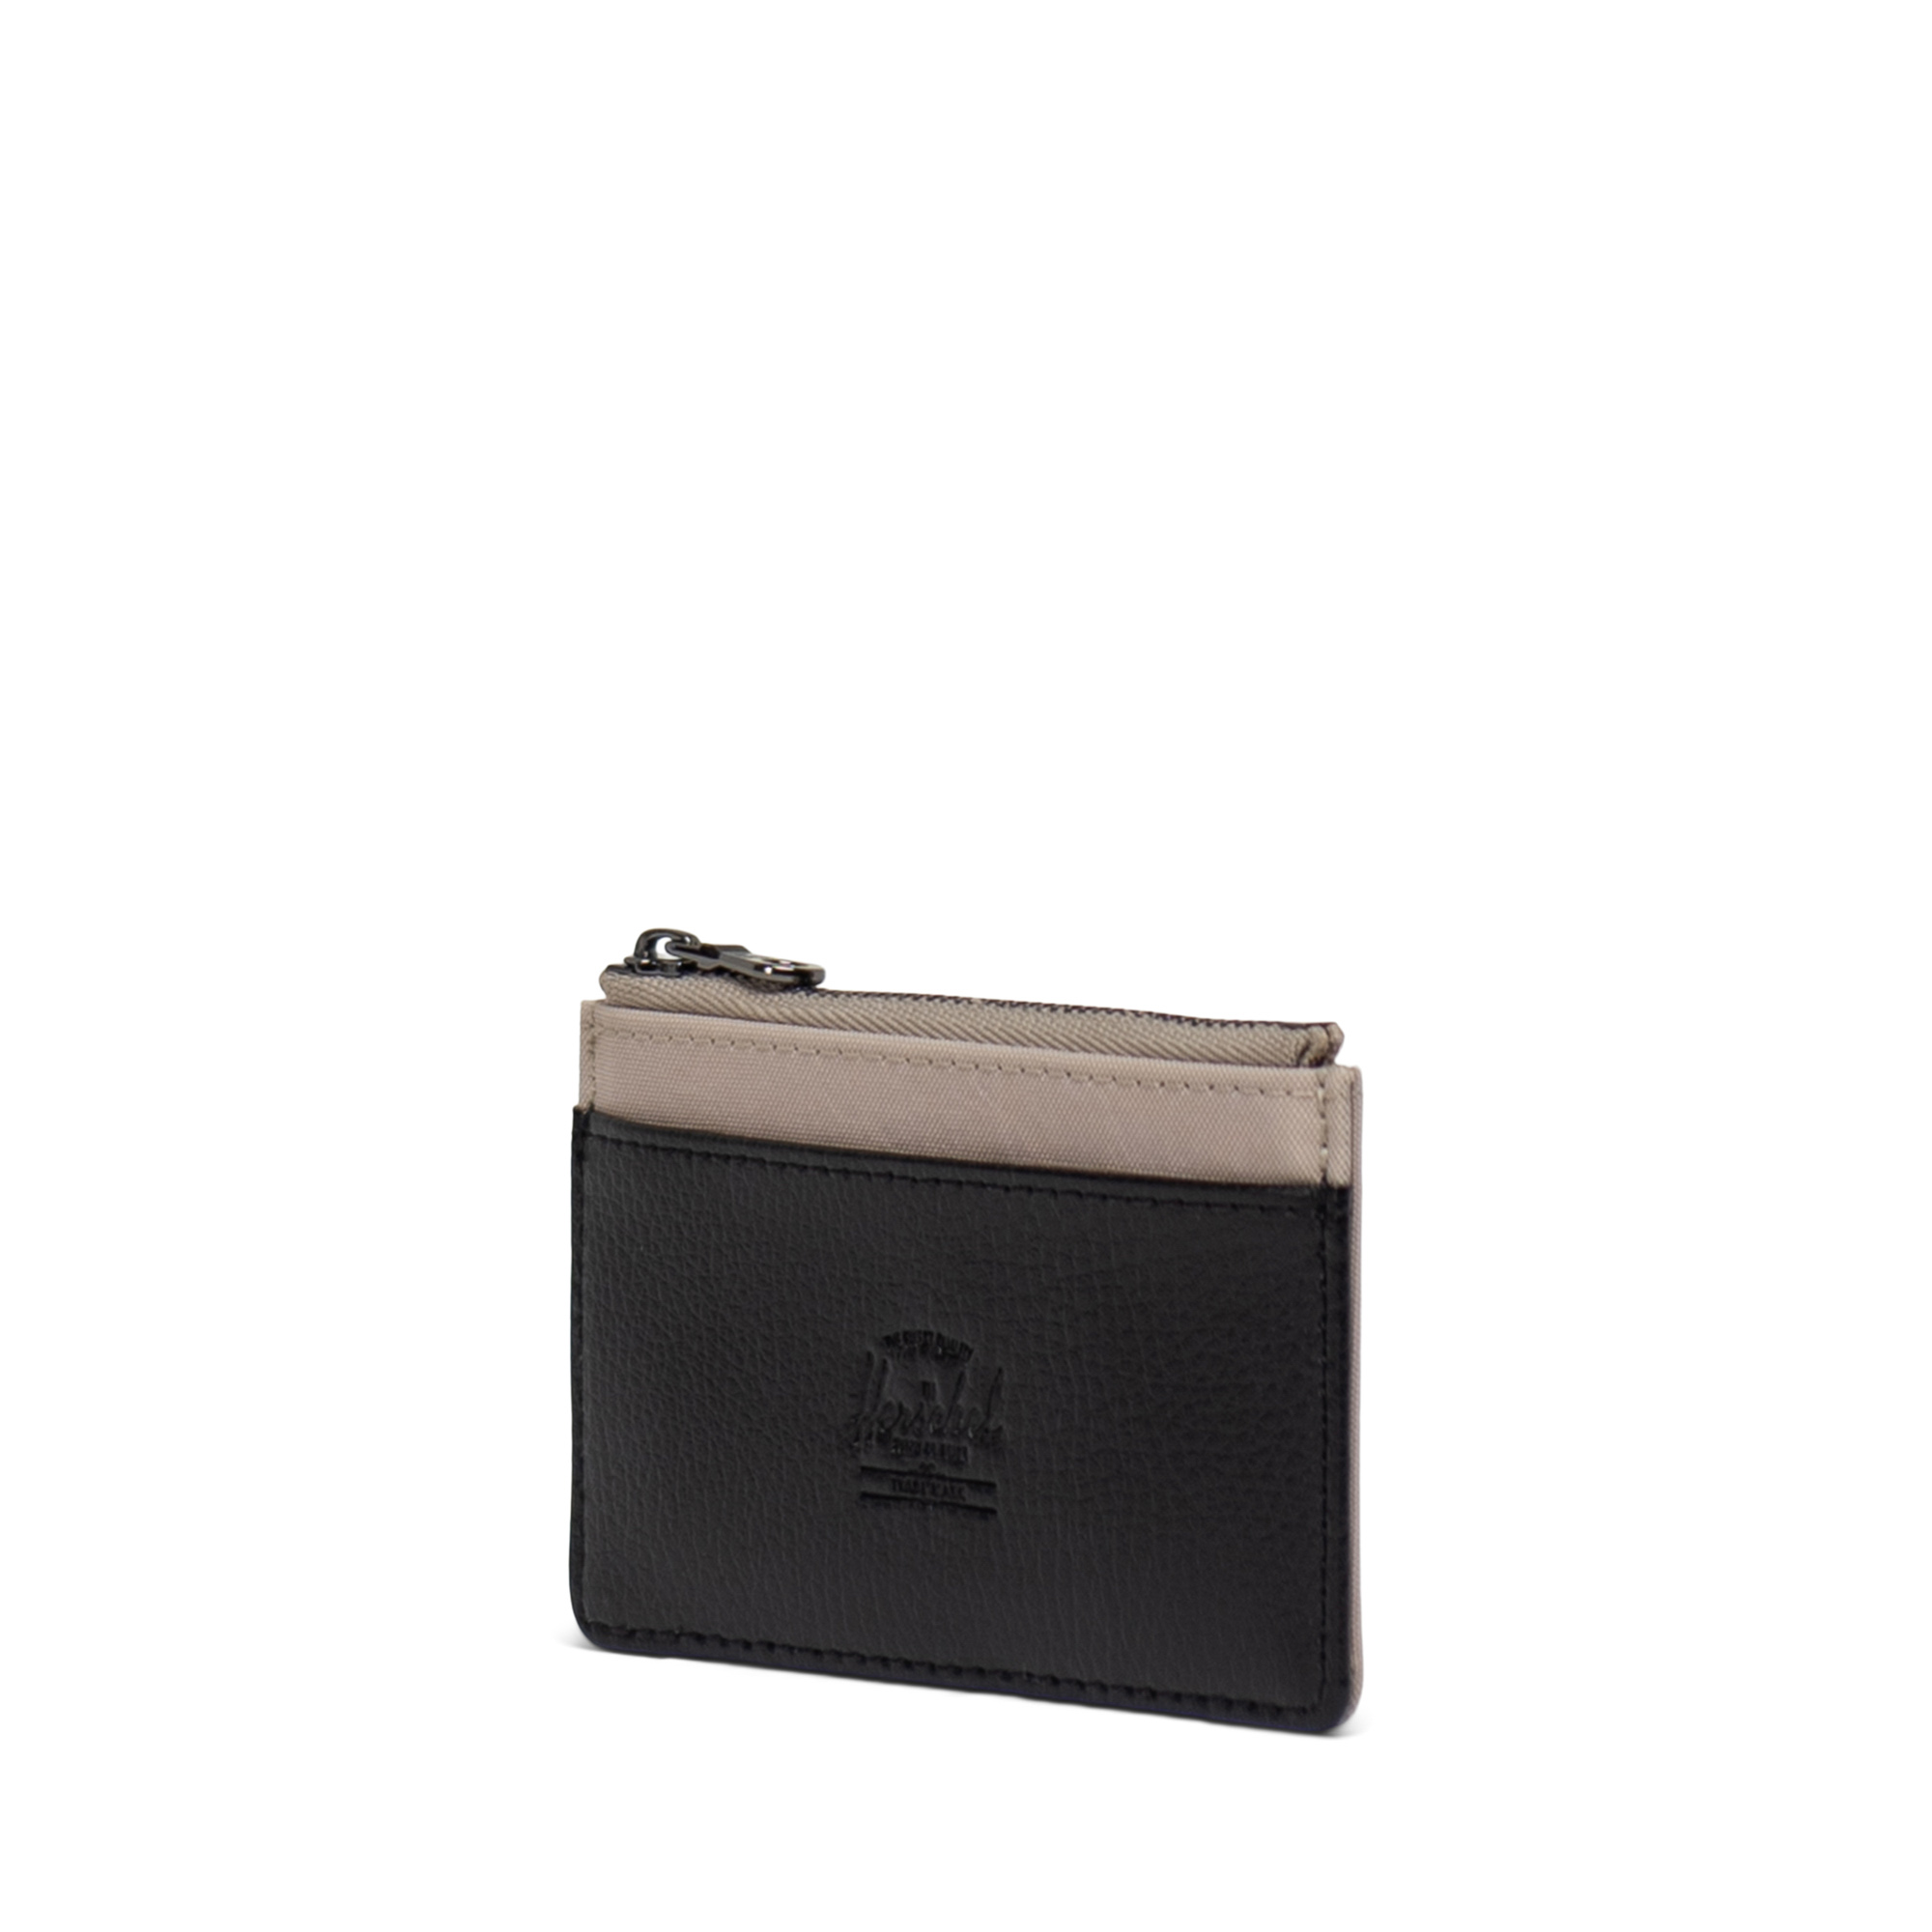 Branded Leather Wallets for Men » Buy online from